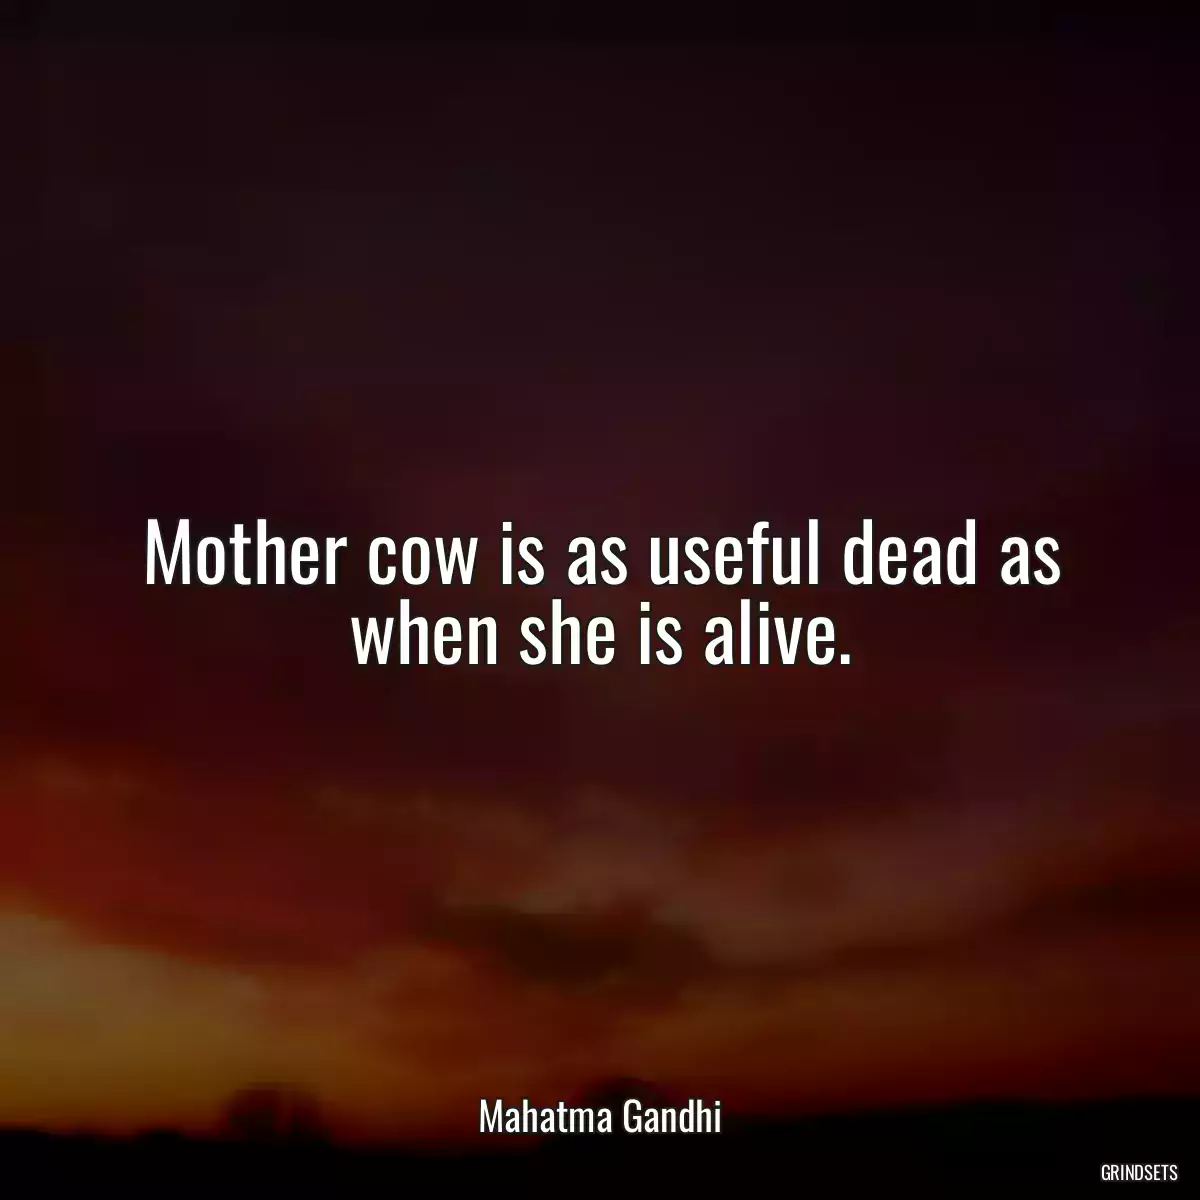 Mother cow is as useful dead as when she is alive.